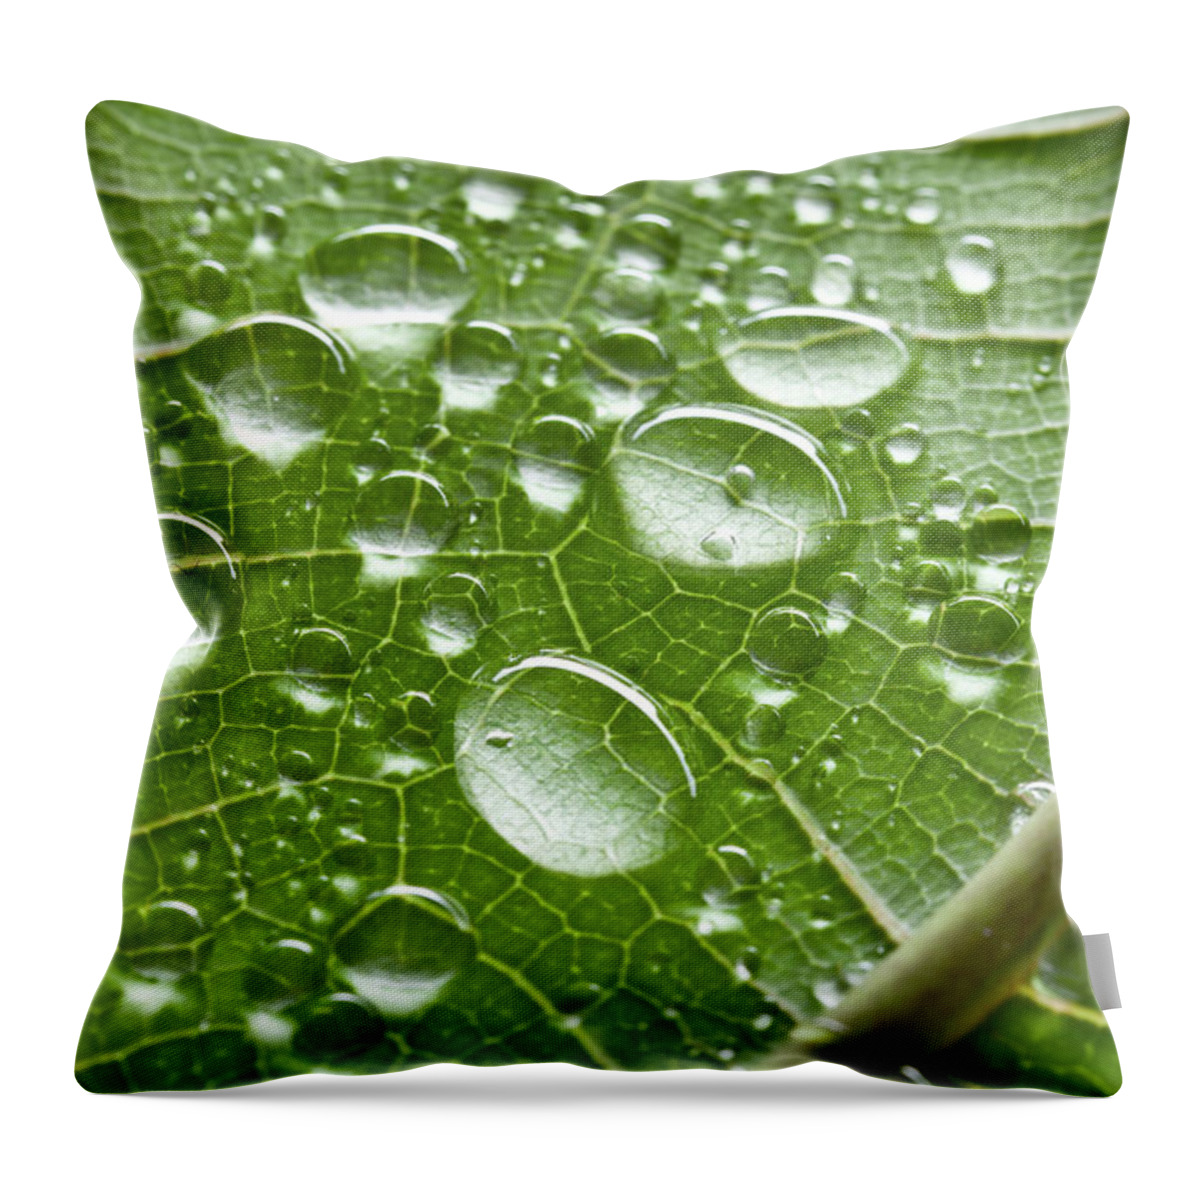 Close-up Throw Pillow featuring the photograph Macro Of Green Leaf With Water Drops by Amriphoto